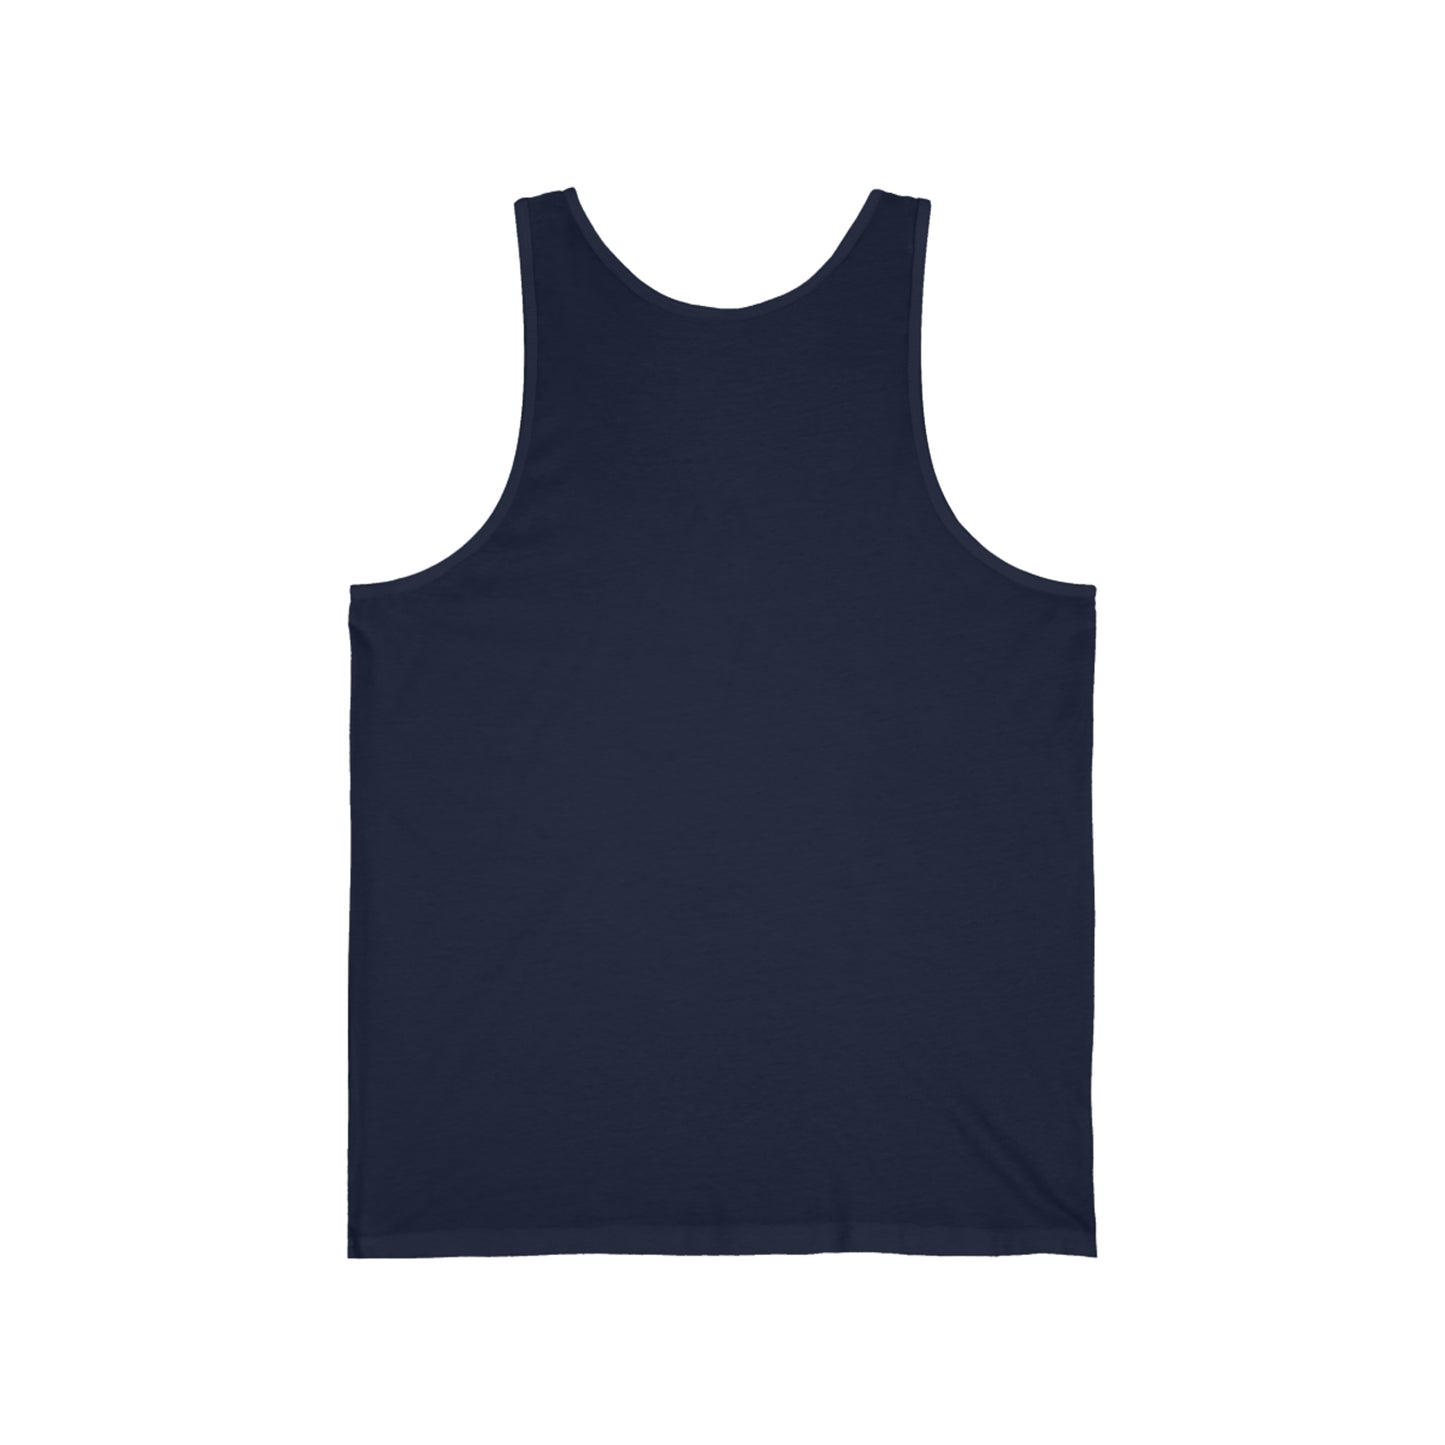 Japanese Roots Design 1: Tank Top